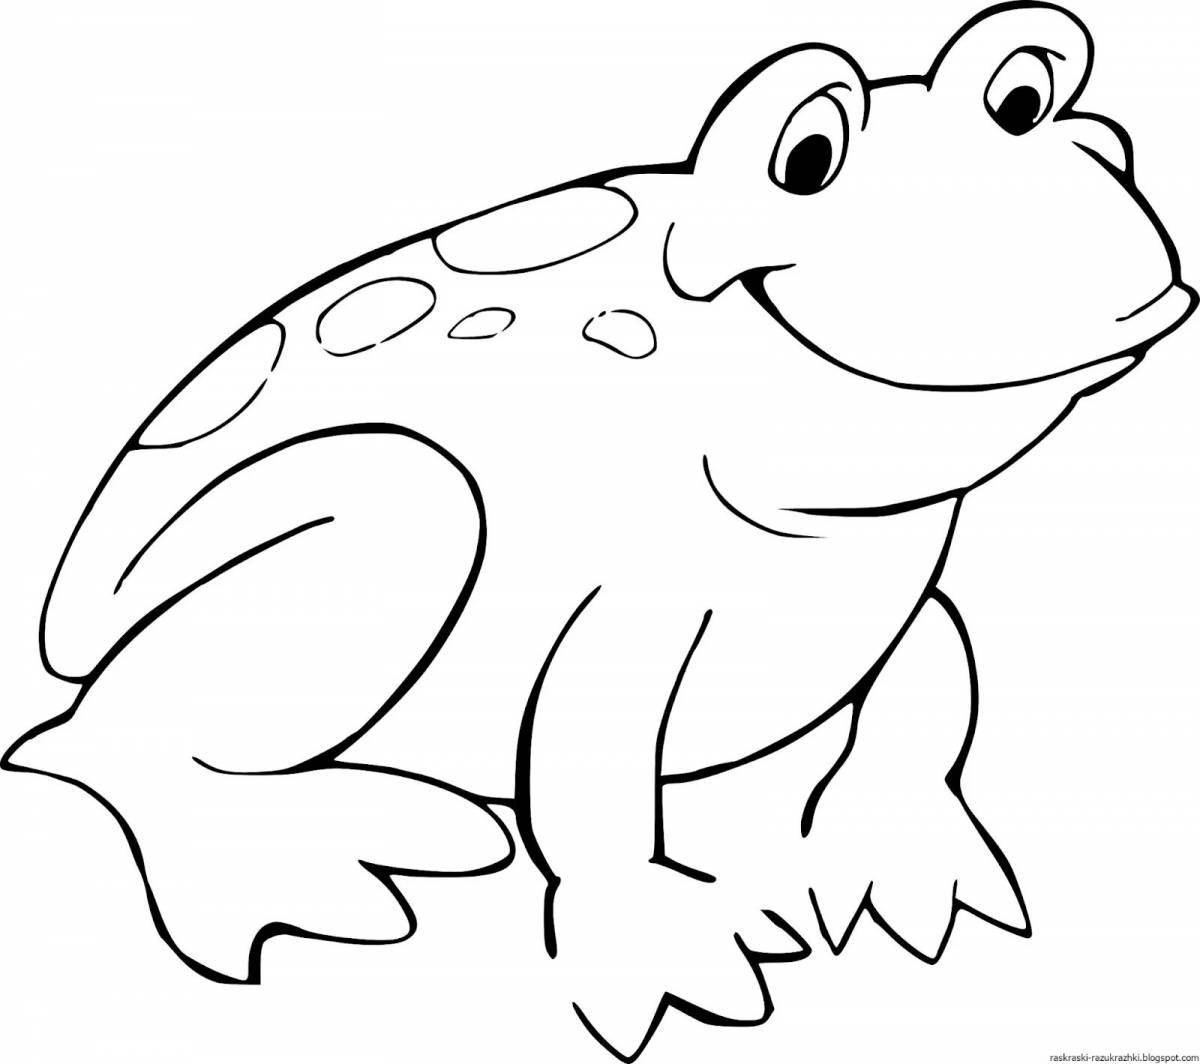 Cute frog coloring book for 3-4 year olds